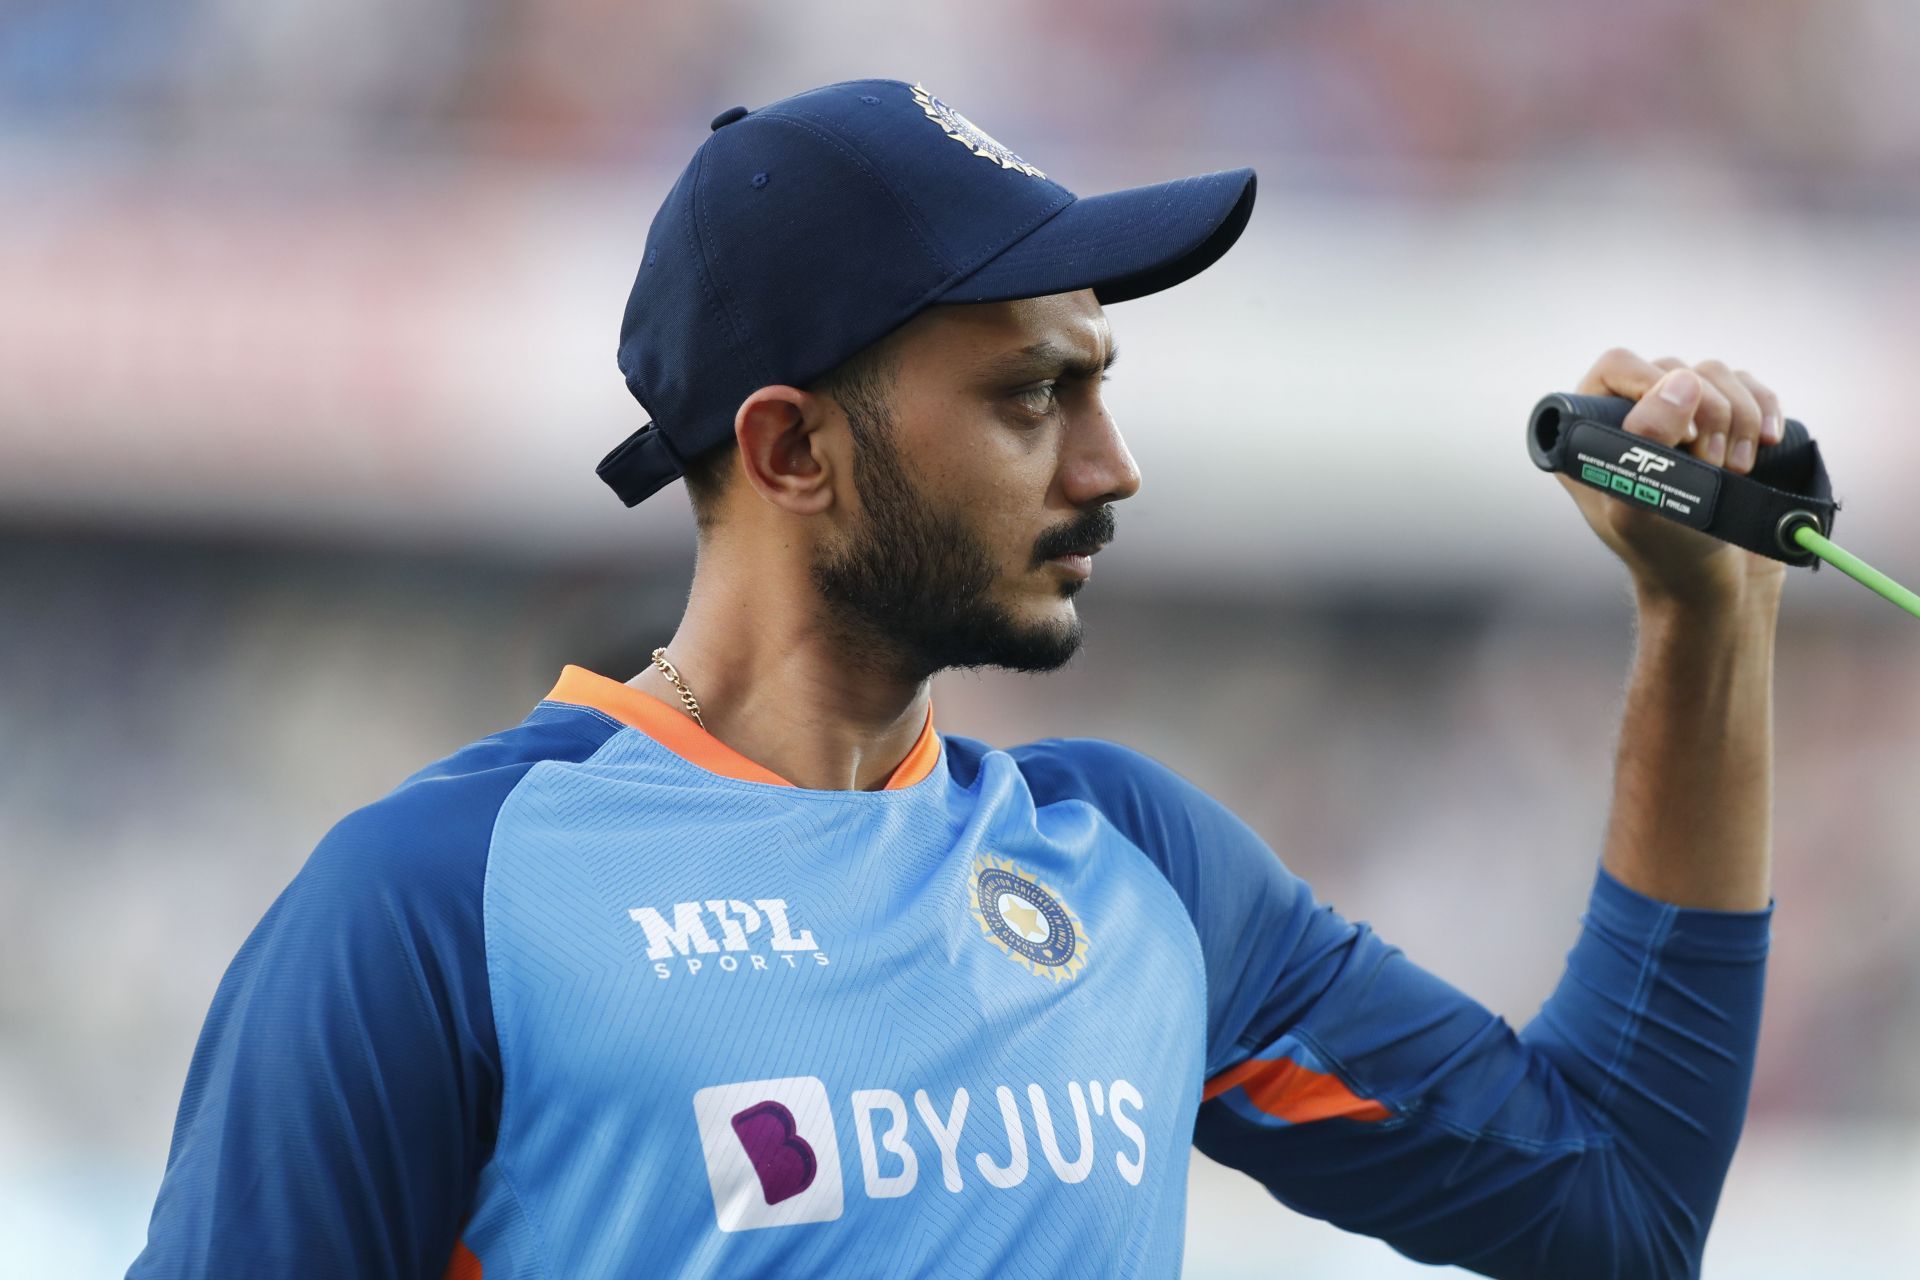 Axar Patel was the last hope with the bat